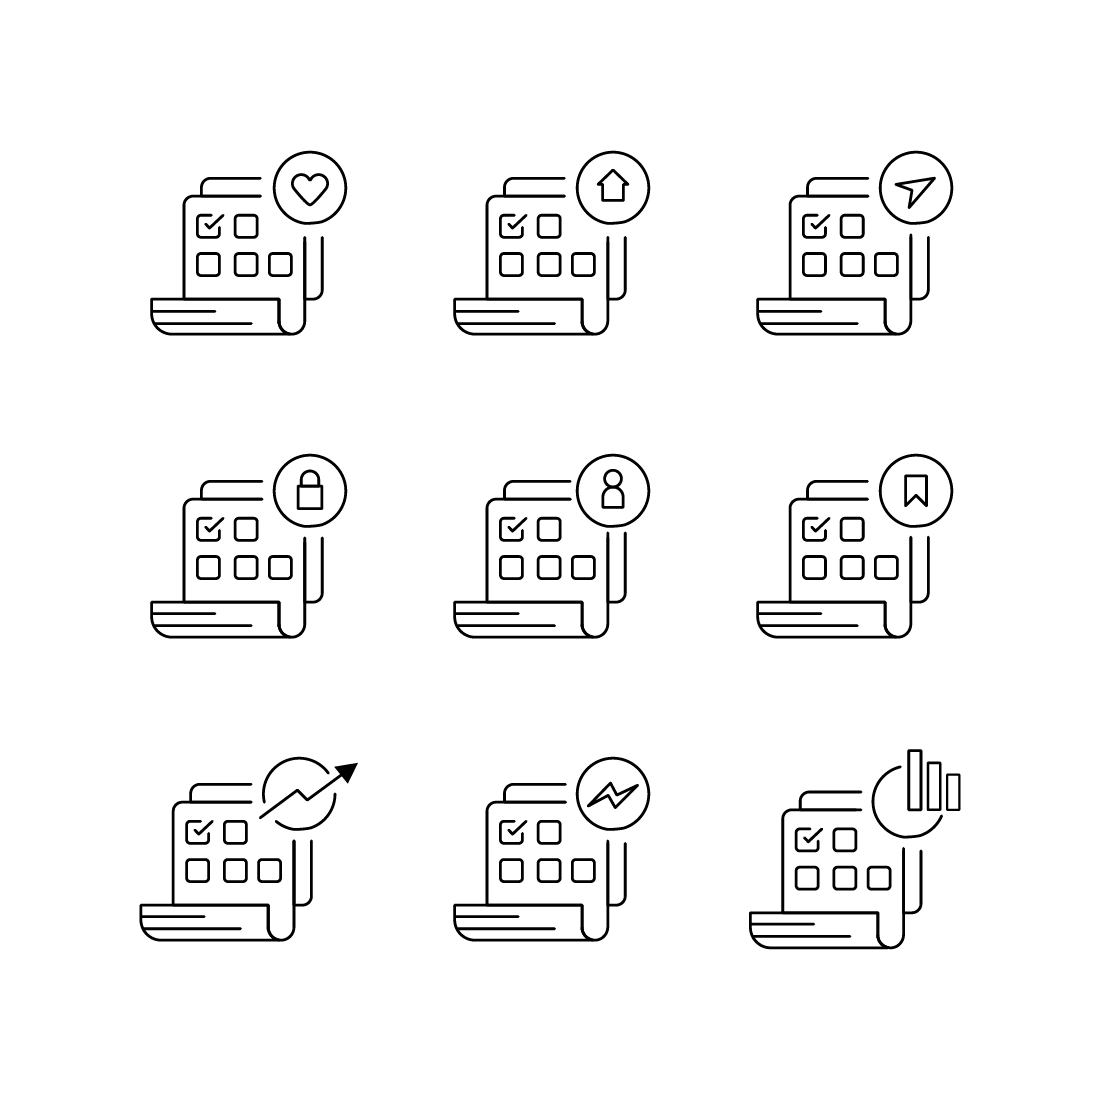 paper,love,block,arrow,share flat illustration icon for your app or web cover image.